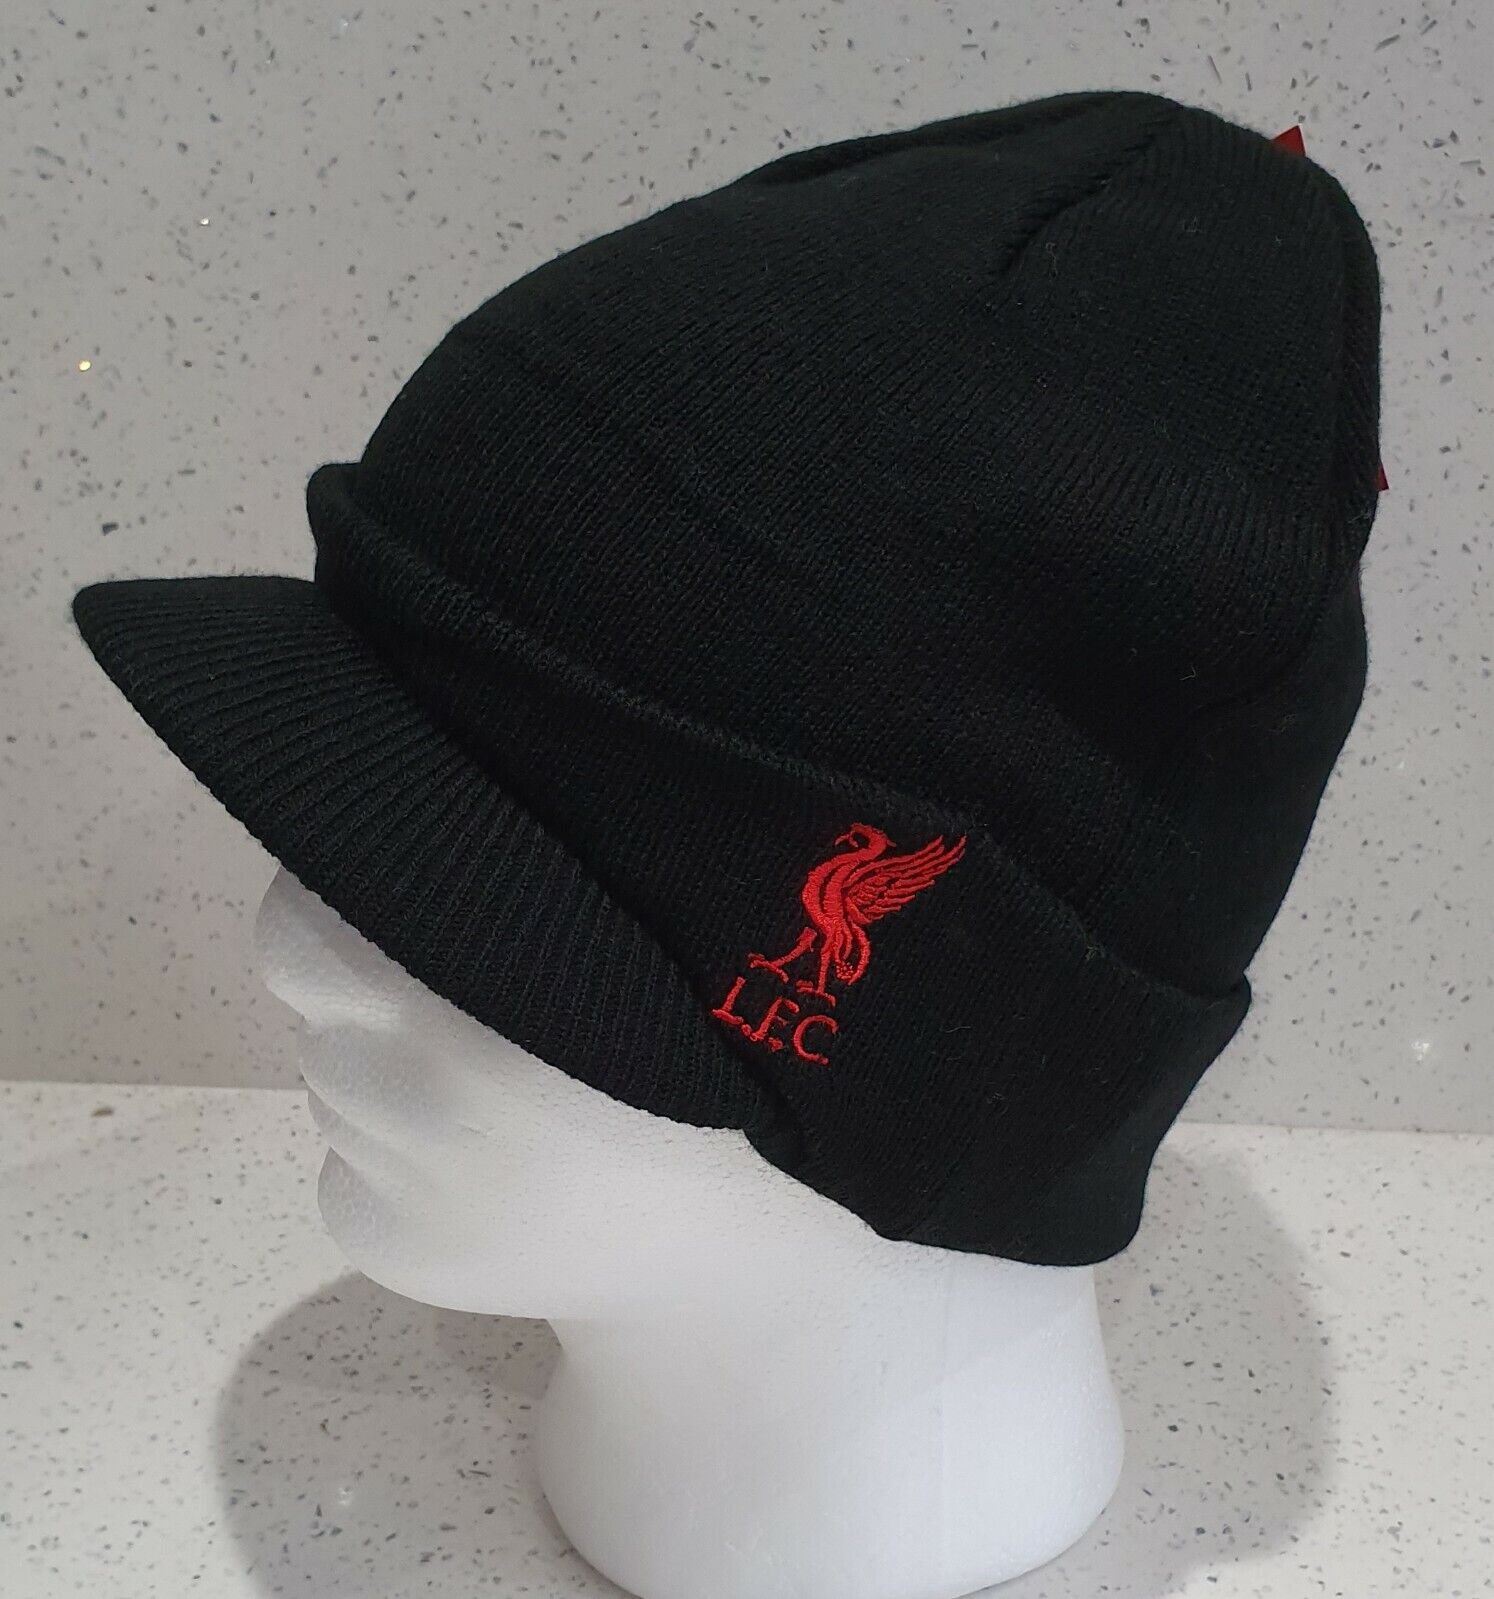 Liverpool Official Peaked Style Bronx Hat - Black - Great Gift I